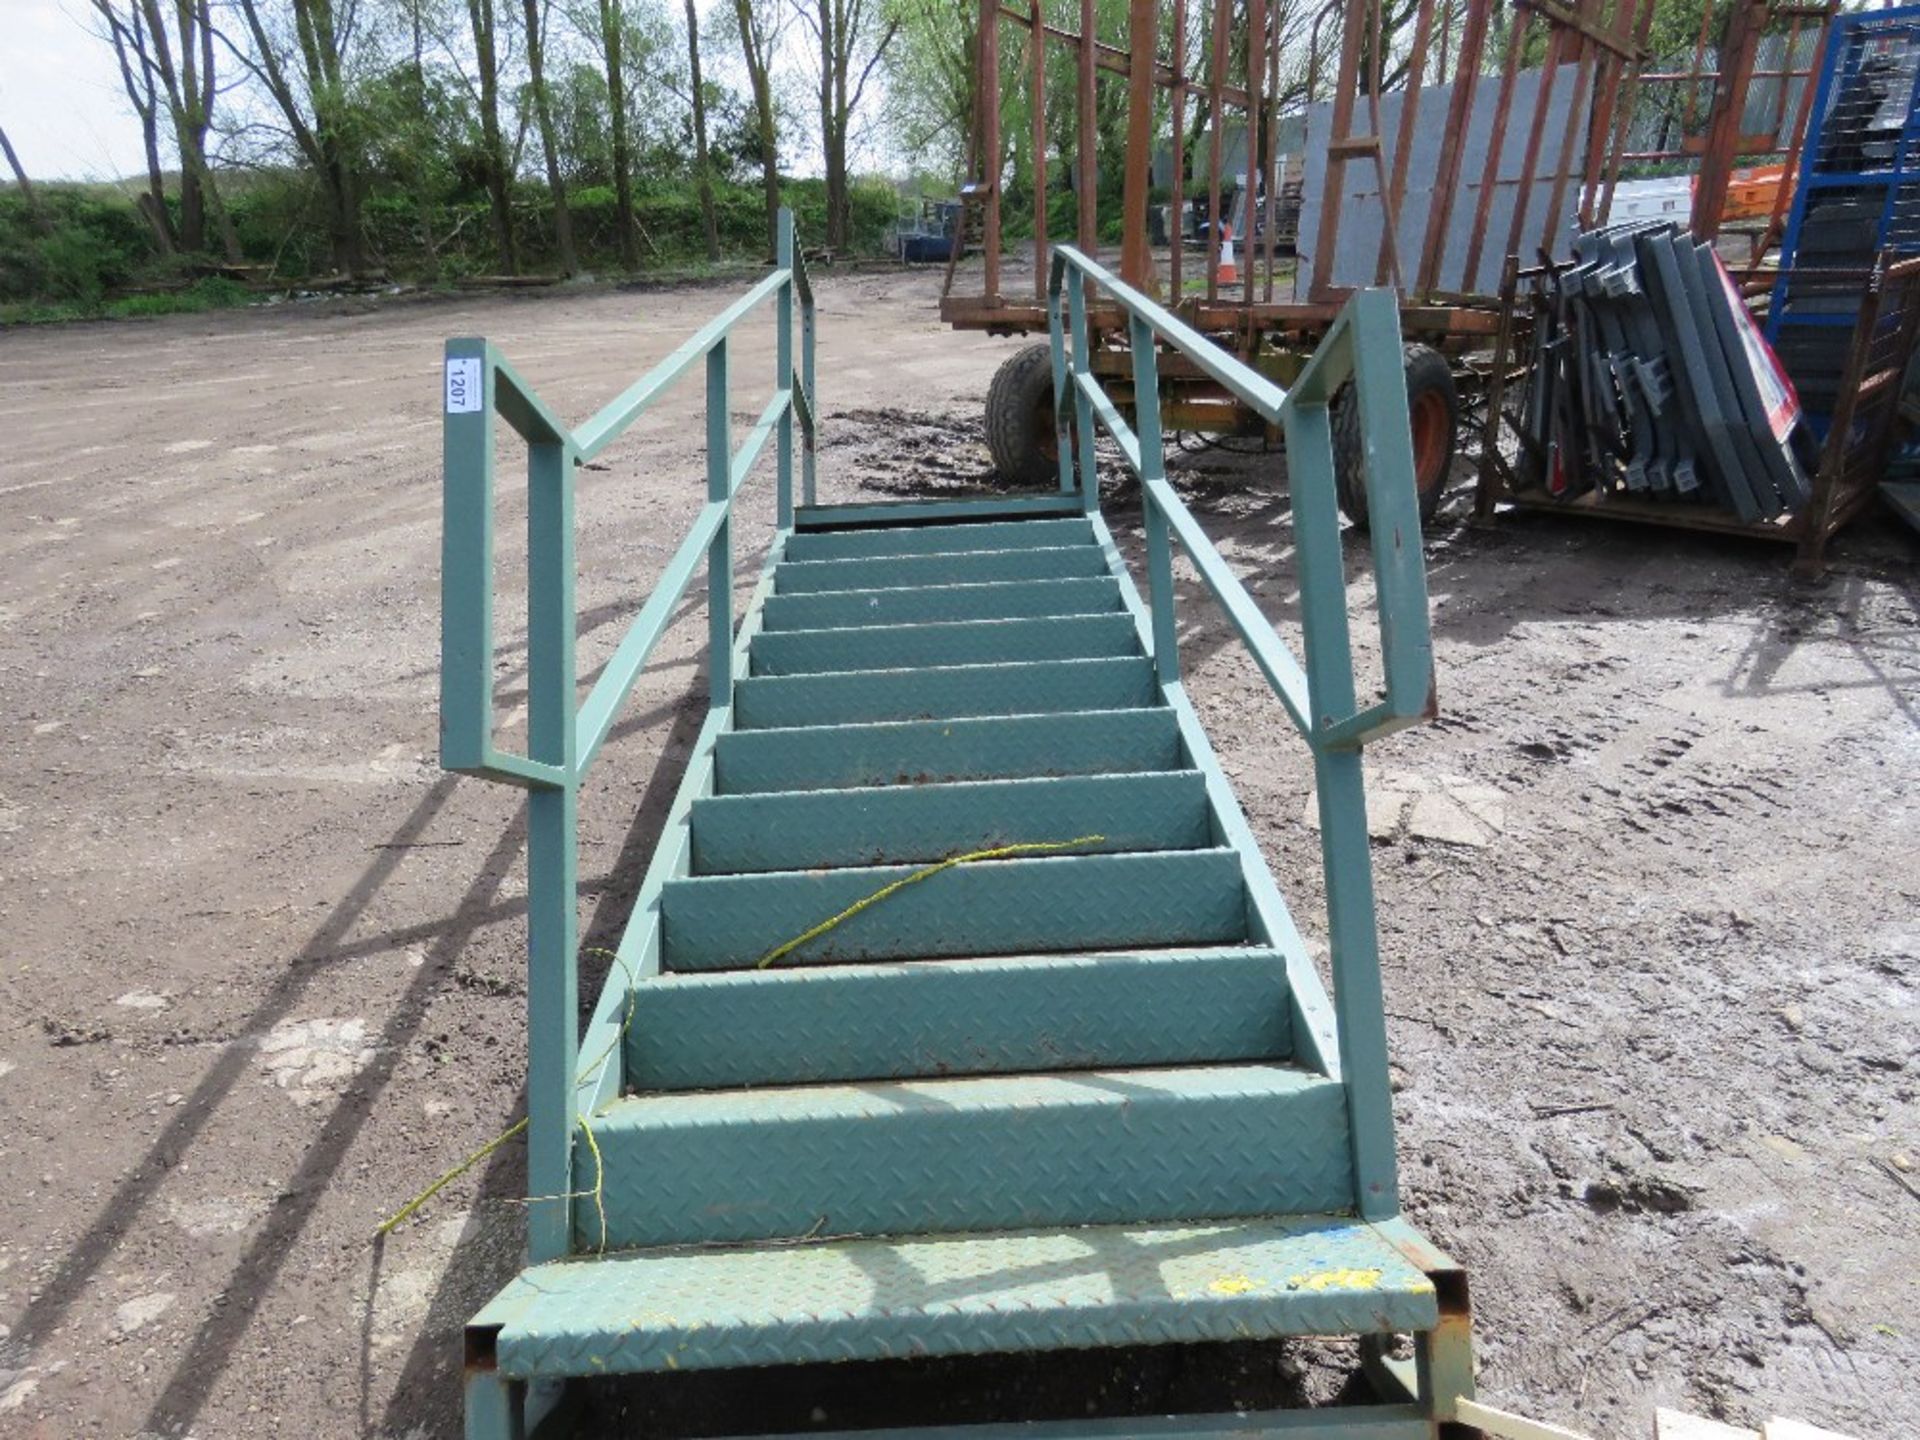 STEEL STAIRCASE FOR ACCESS TO PORTABLE OFFICE ETC. 13FT OVERALL LENGTH APPROX WITH A LANDING. 12 TRE - Image 2 of 4